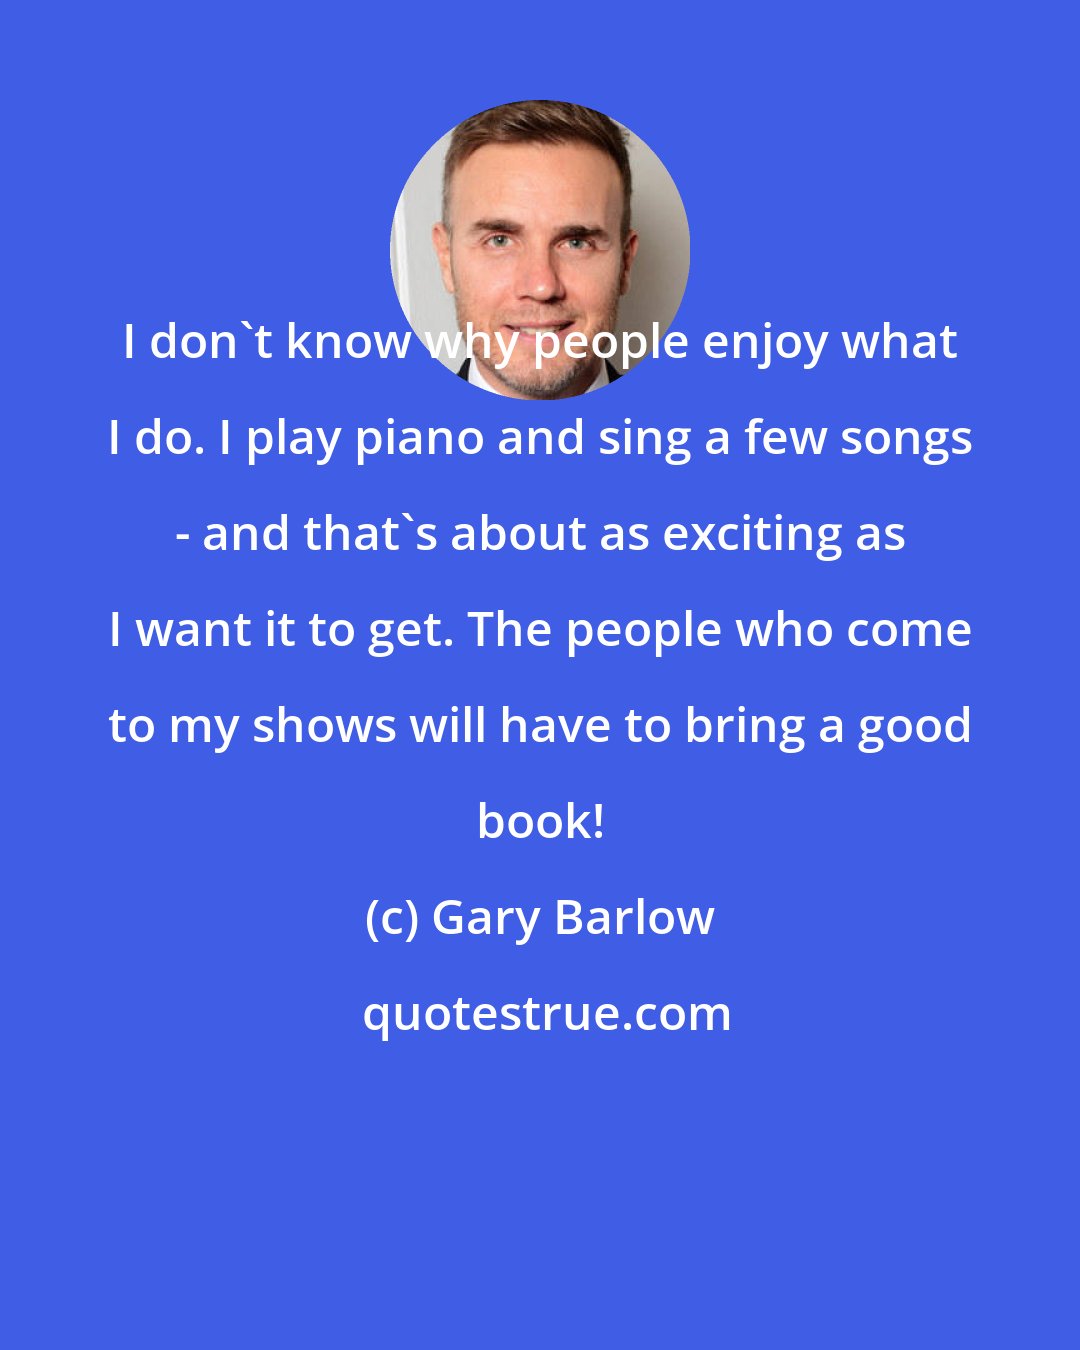 Gary Barlow: I don't know why people enjoy what I do. I play piano and sing a few songs - and that's about as exciting as I want it to get. The people who come to my shows will have to bring a good book!